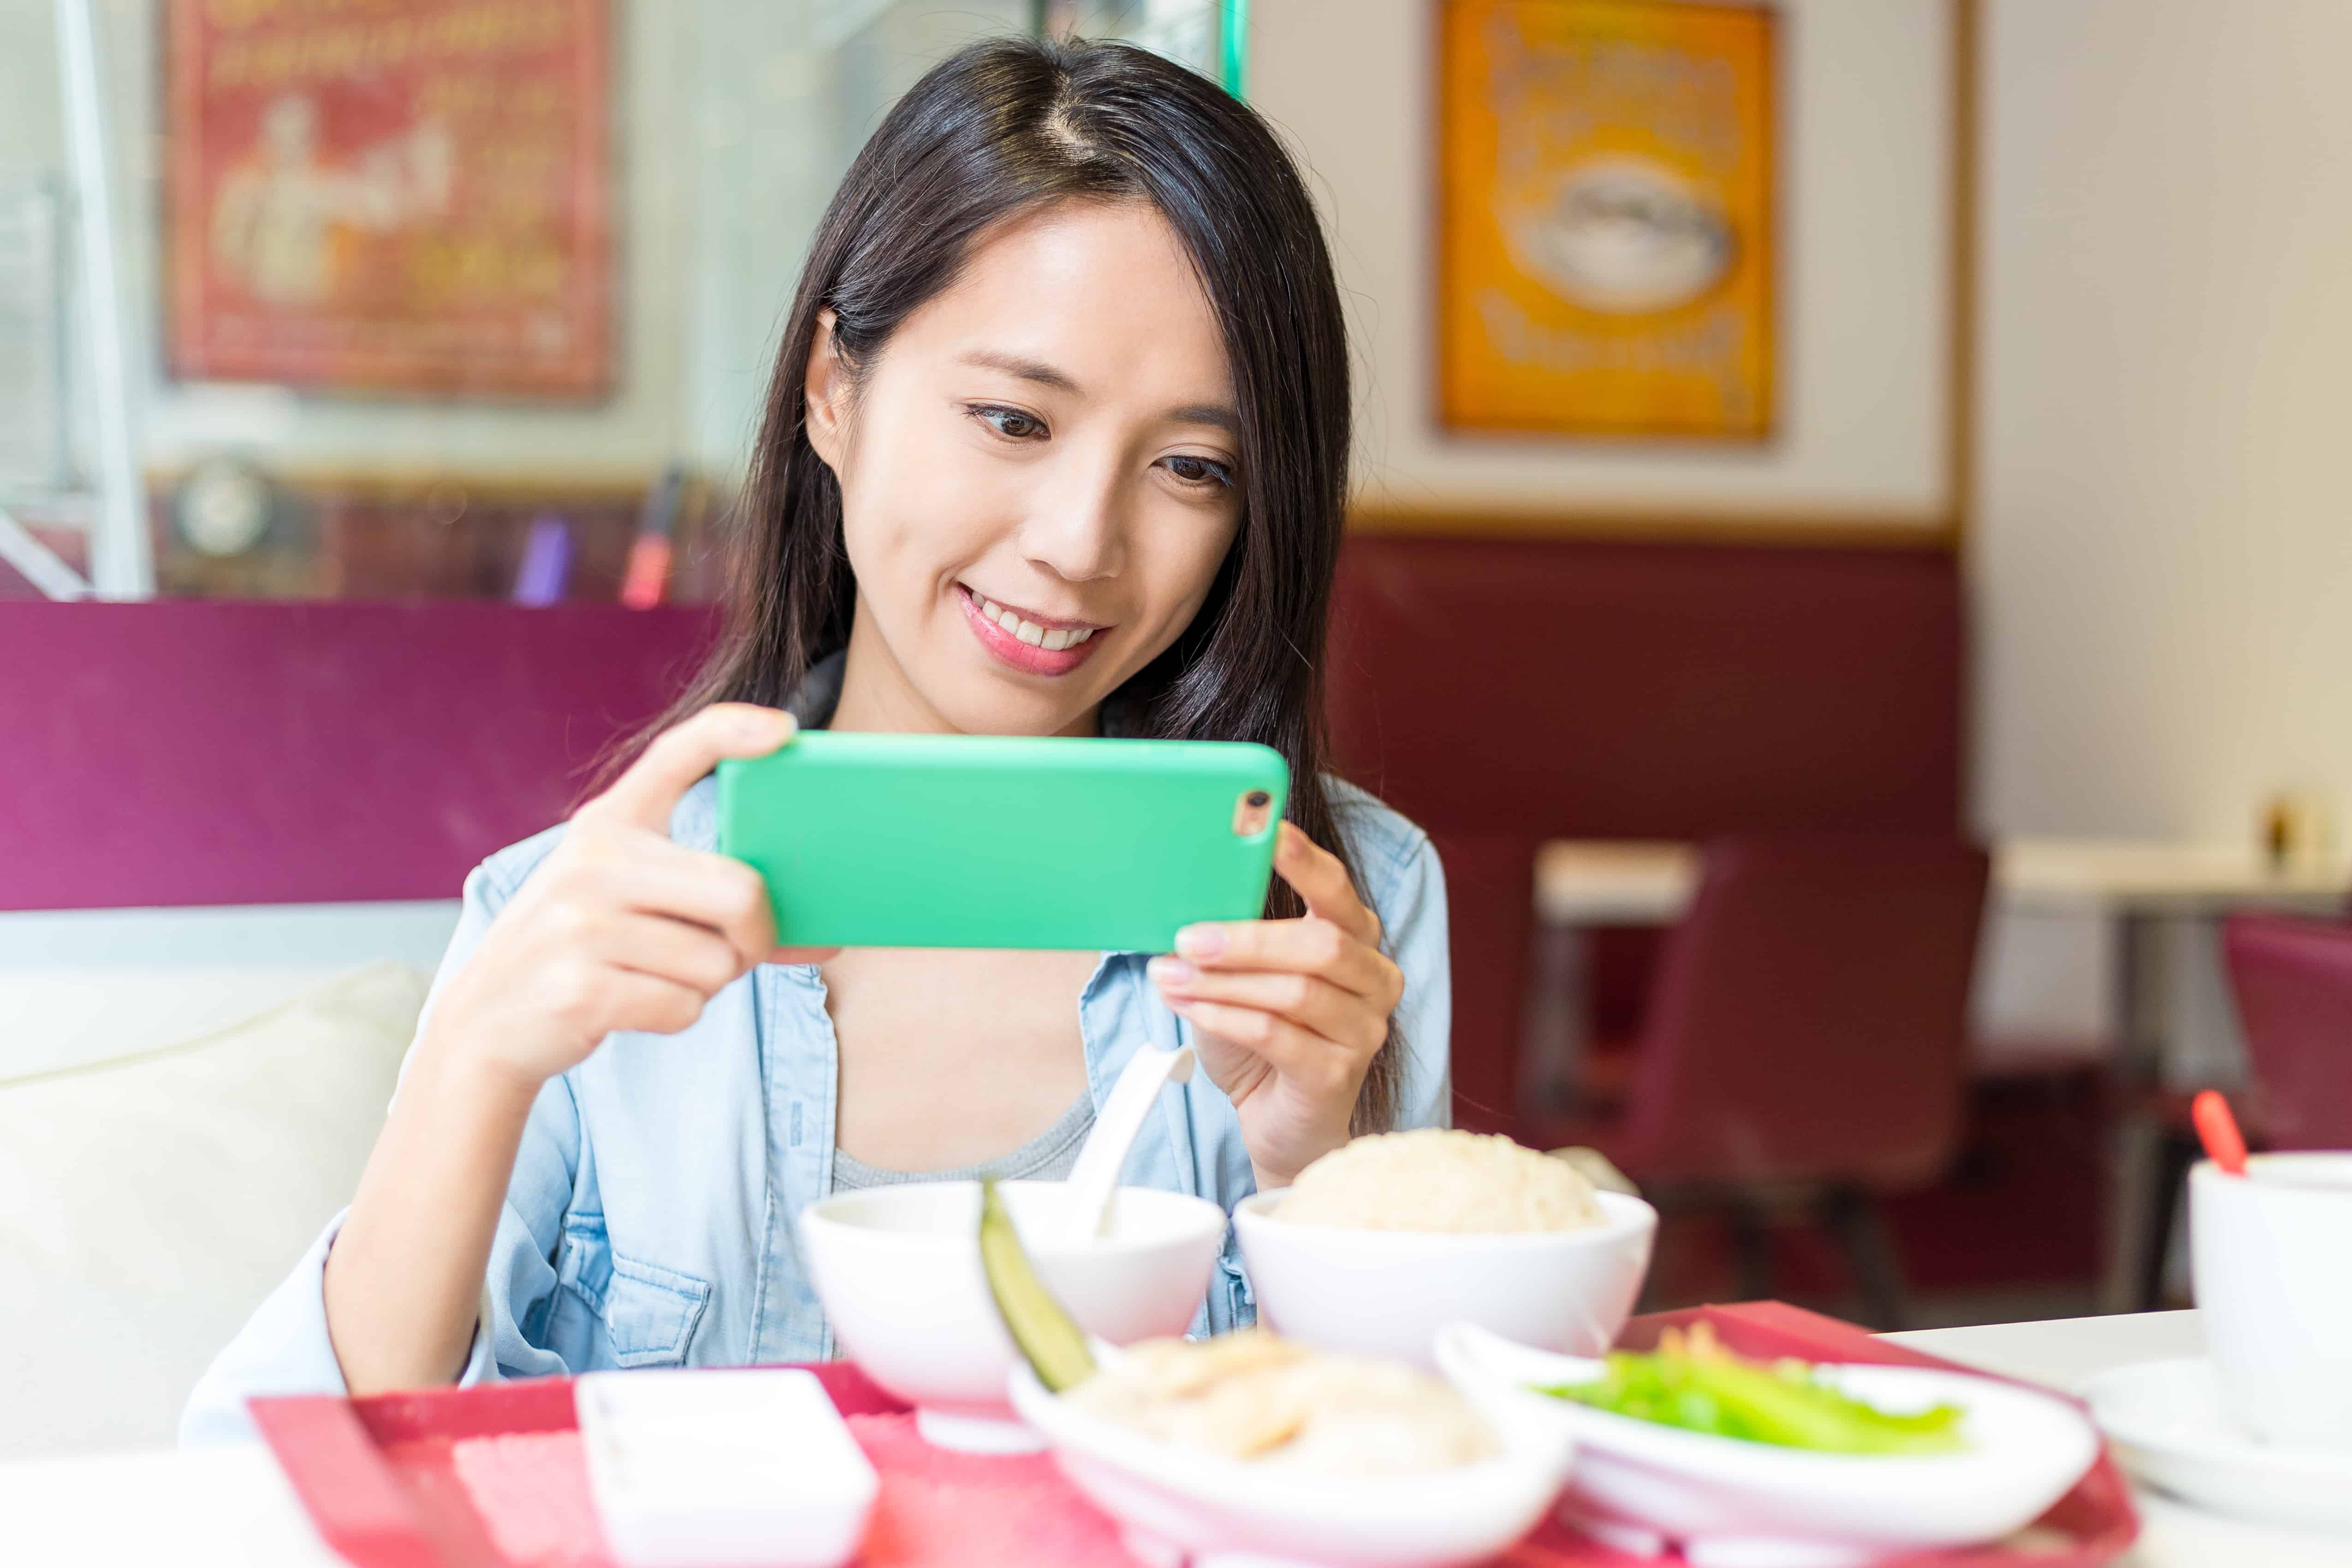 Woman taking photo on her dish in restaurant